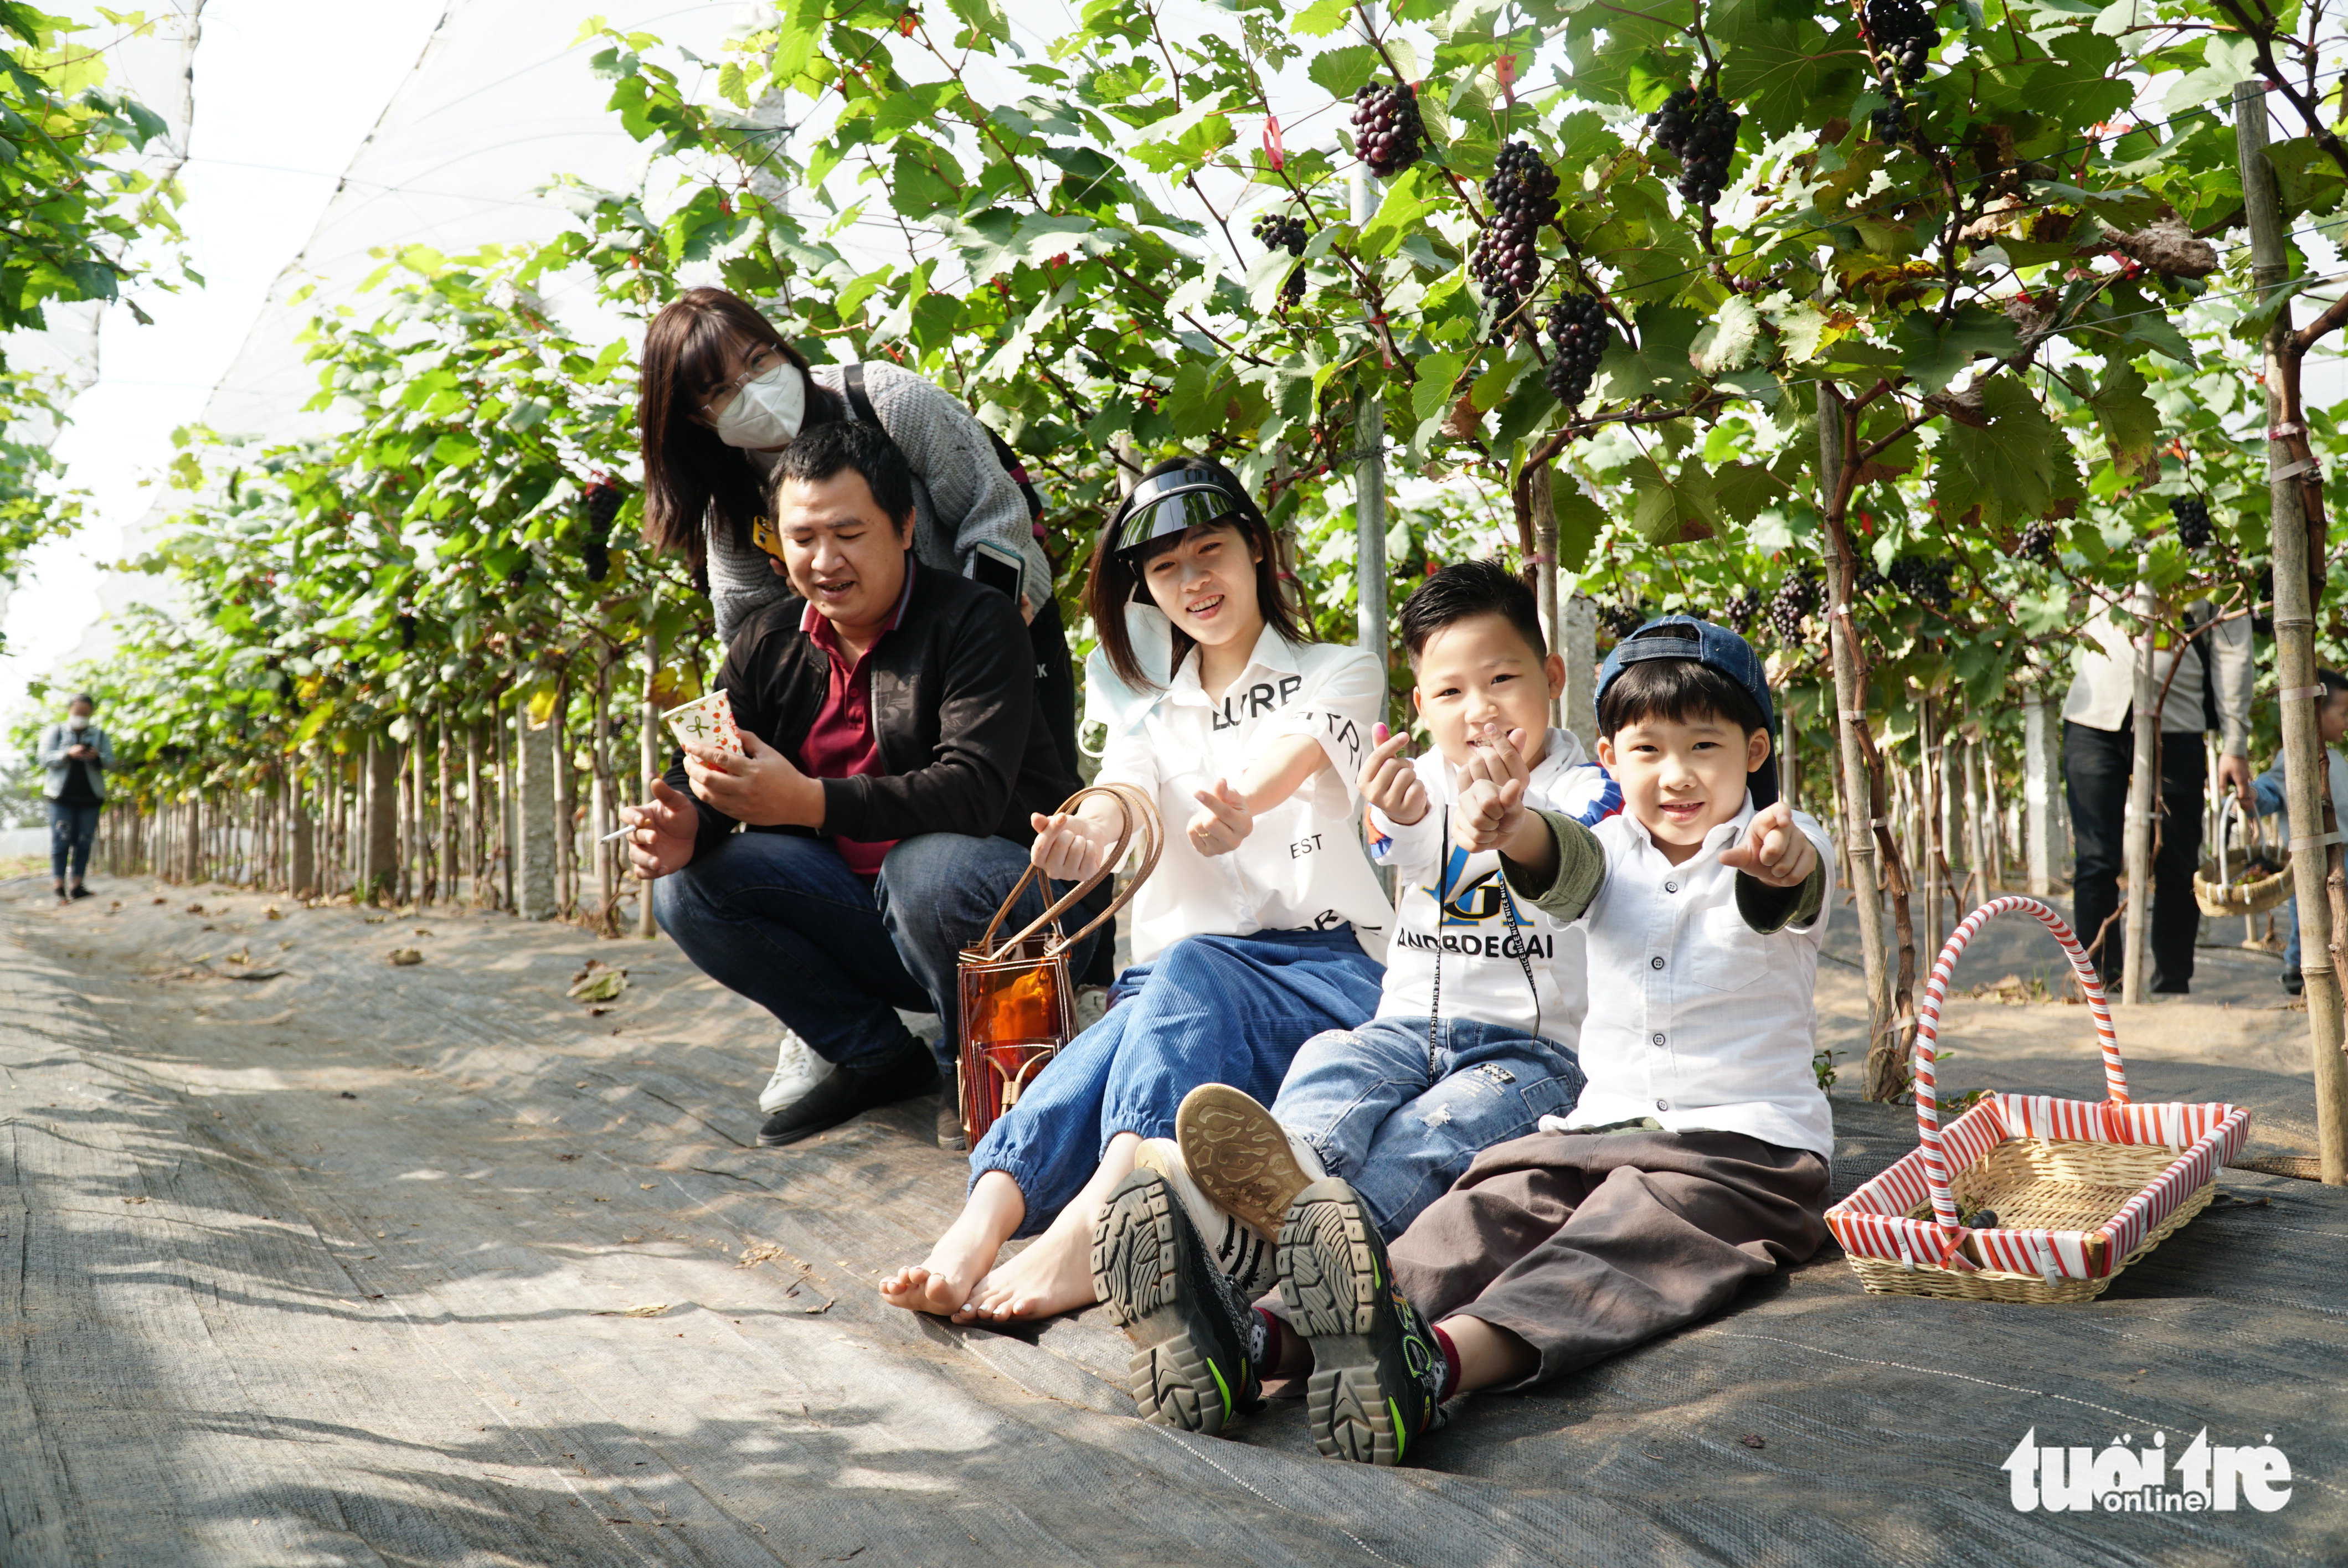 Family members pose for a photo at the vineyard in Dong Anh District, Hanoi. Photo: Tuoi Tre